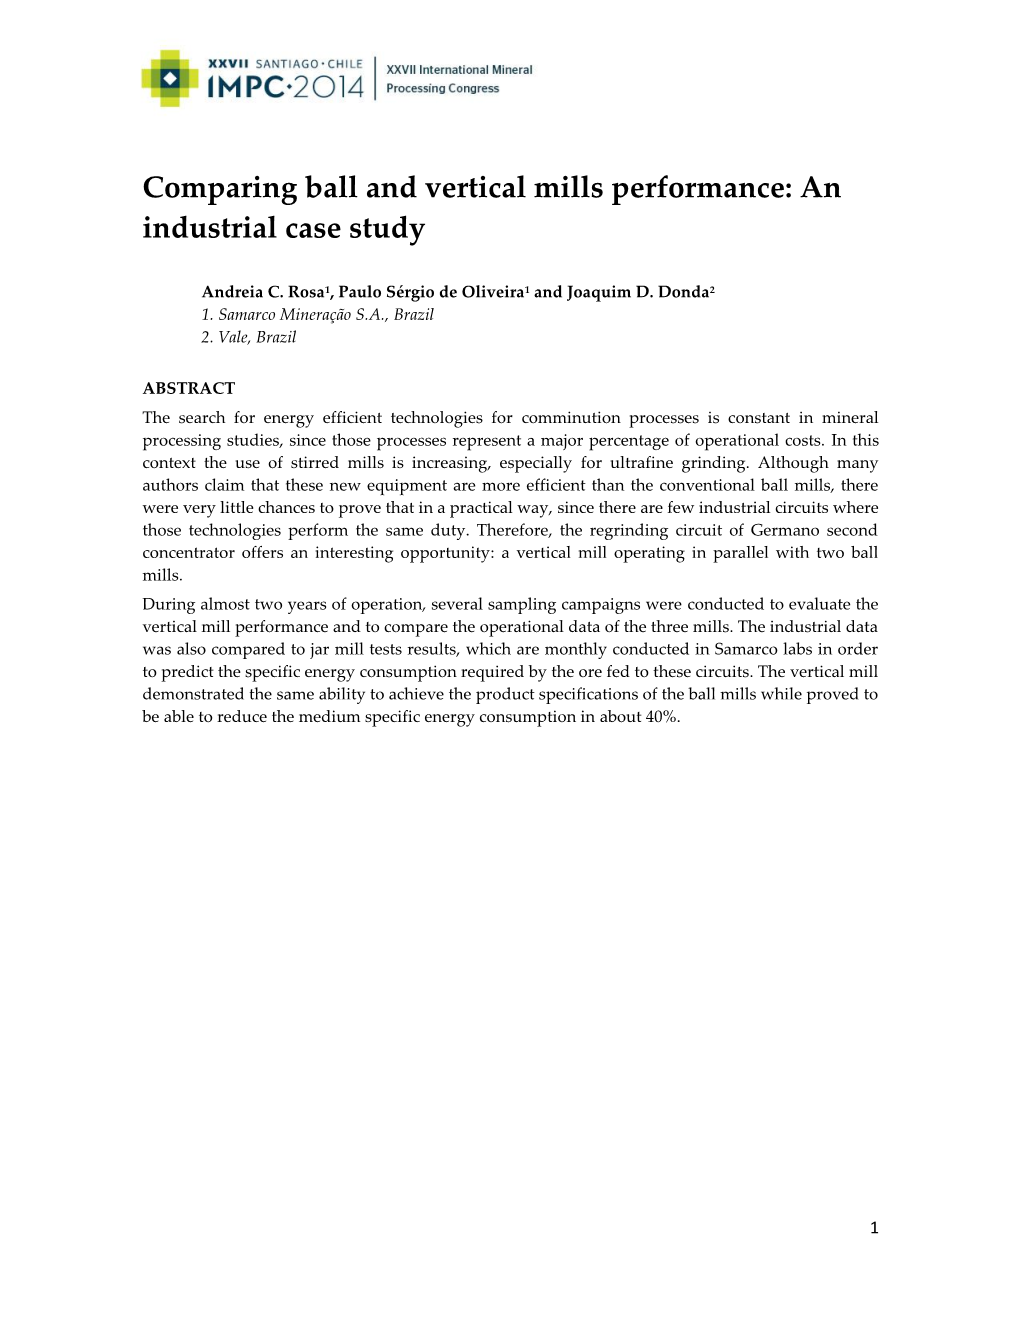 Comparing Ball and Vertical Mills Performance: an Industrial Case Study